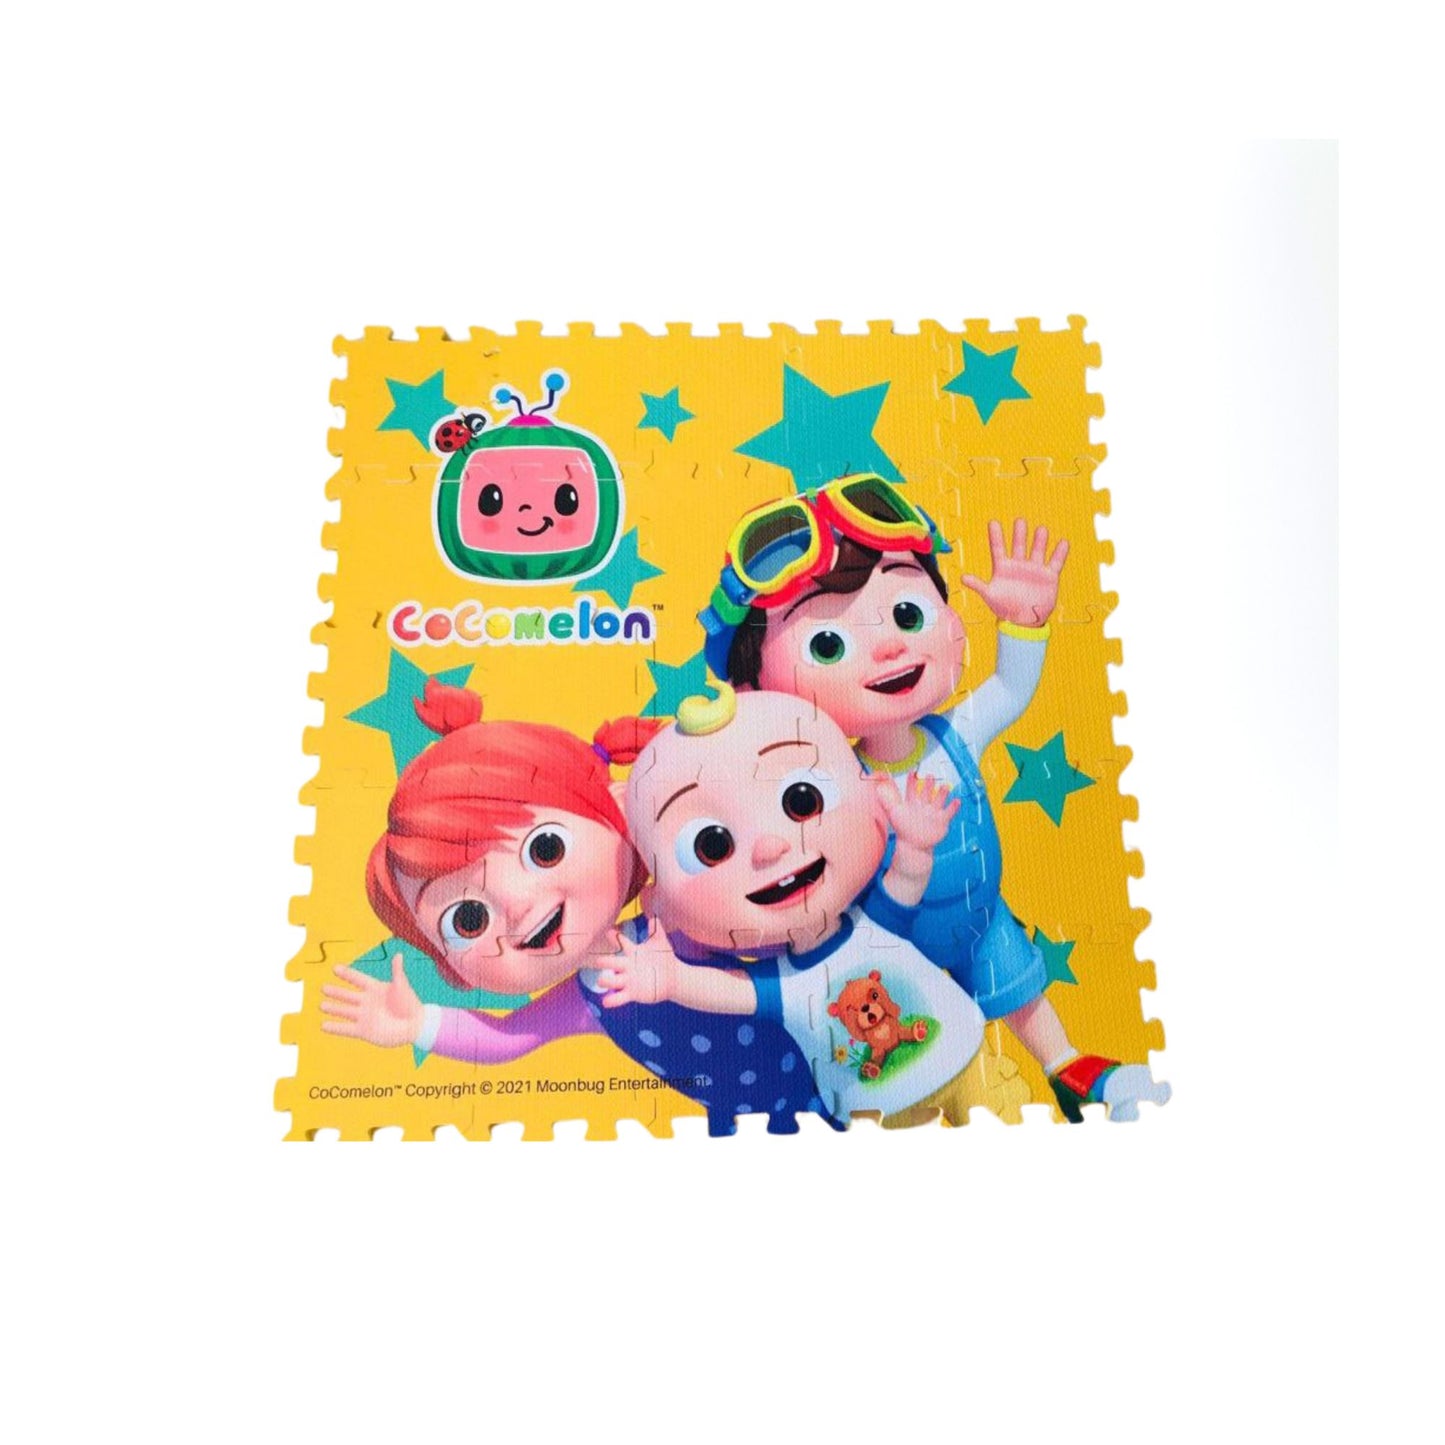 Cocomelon Puzzle Mats I Provide safety for kids, Compact size, Easy to clean, Portable, and Help reduce risk of injuries